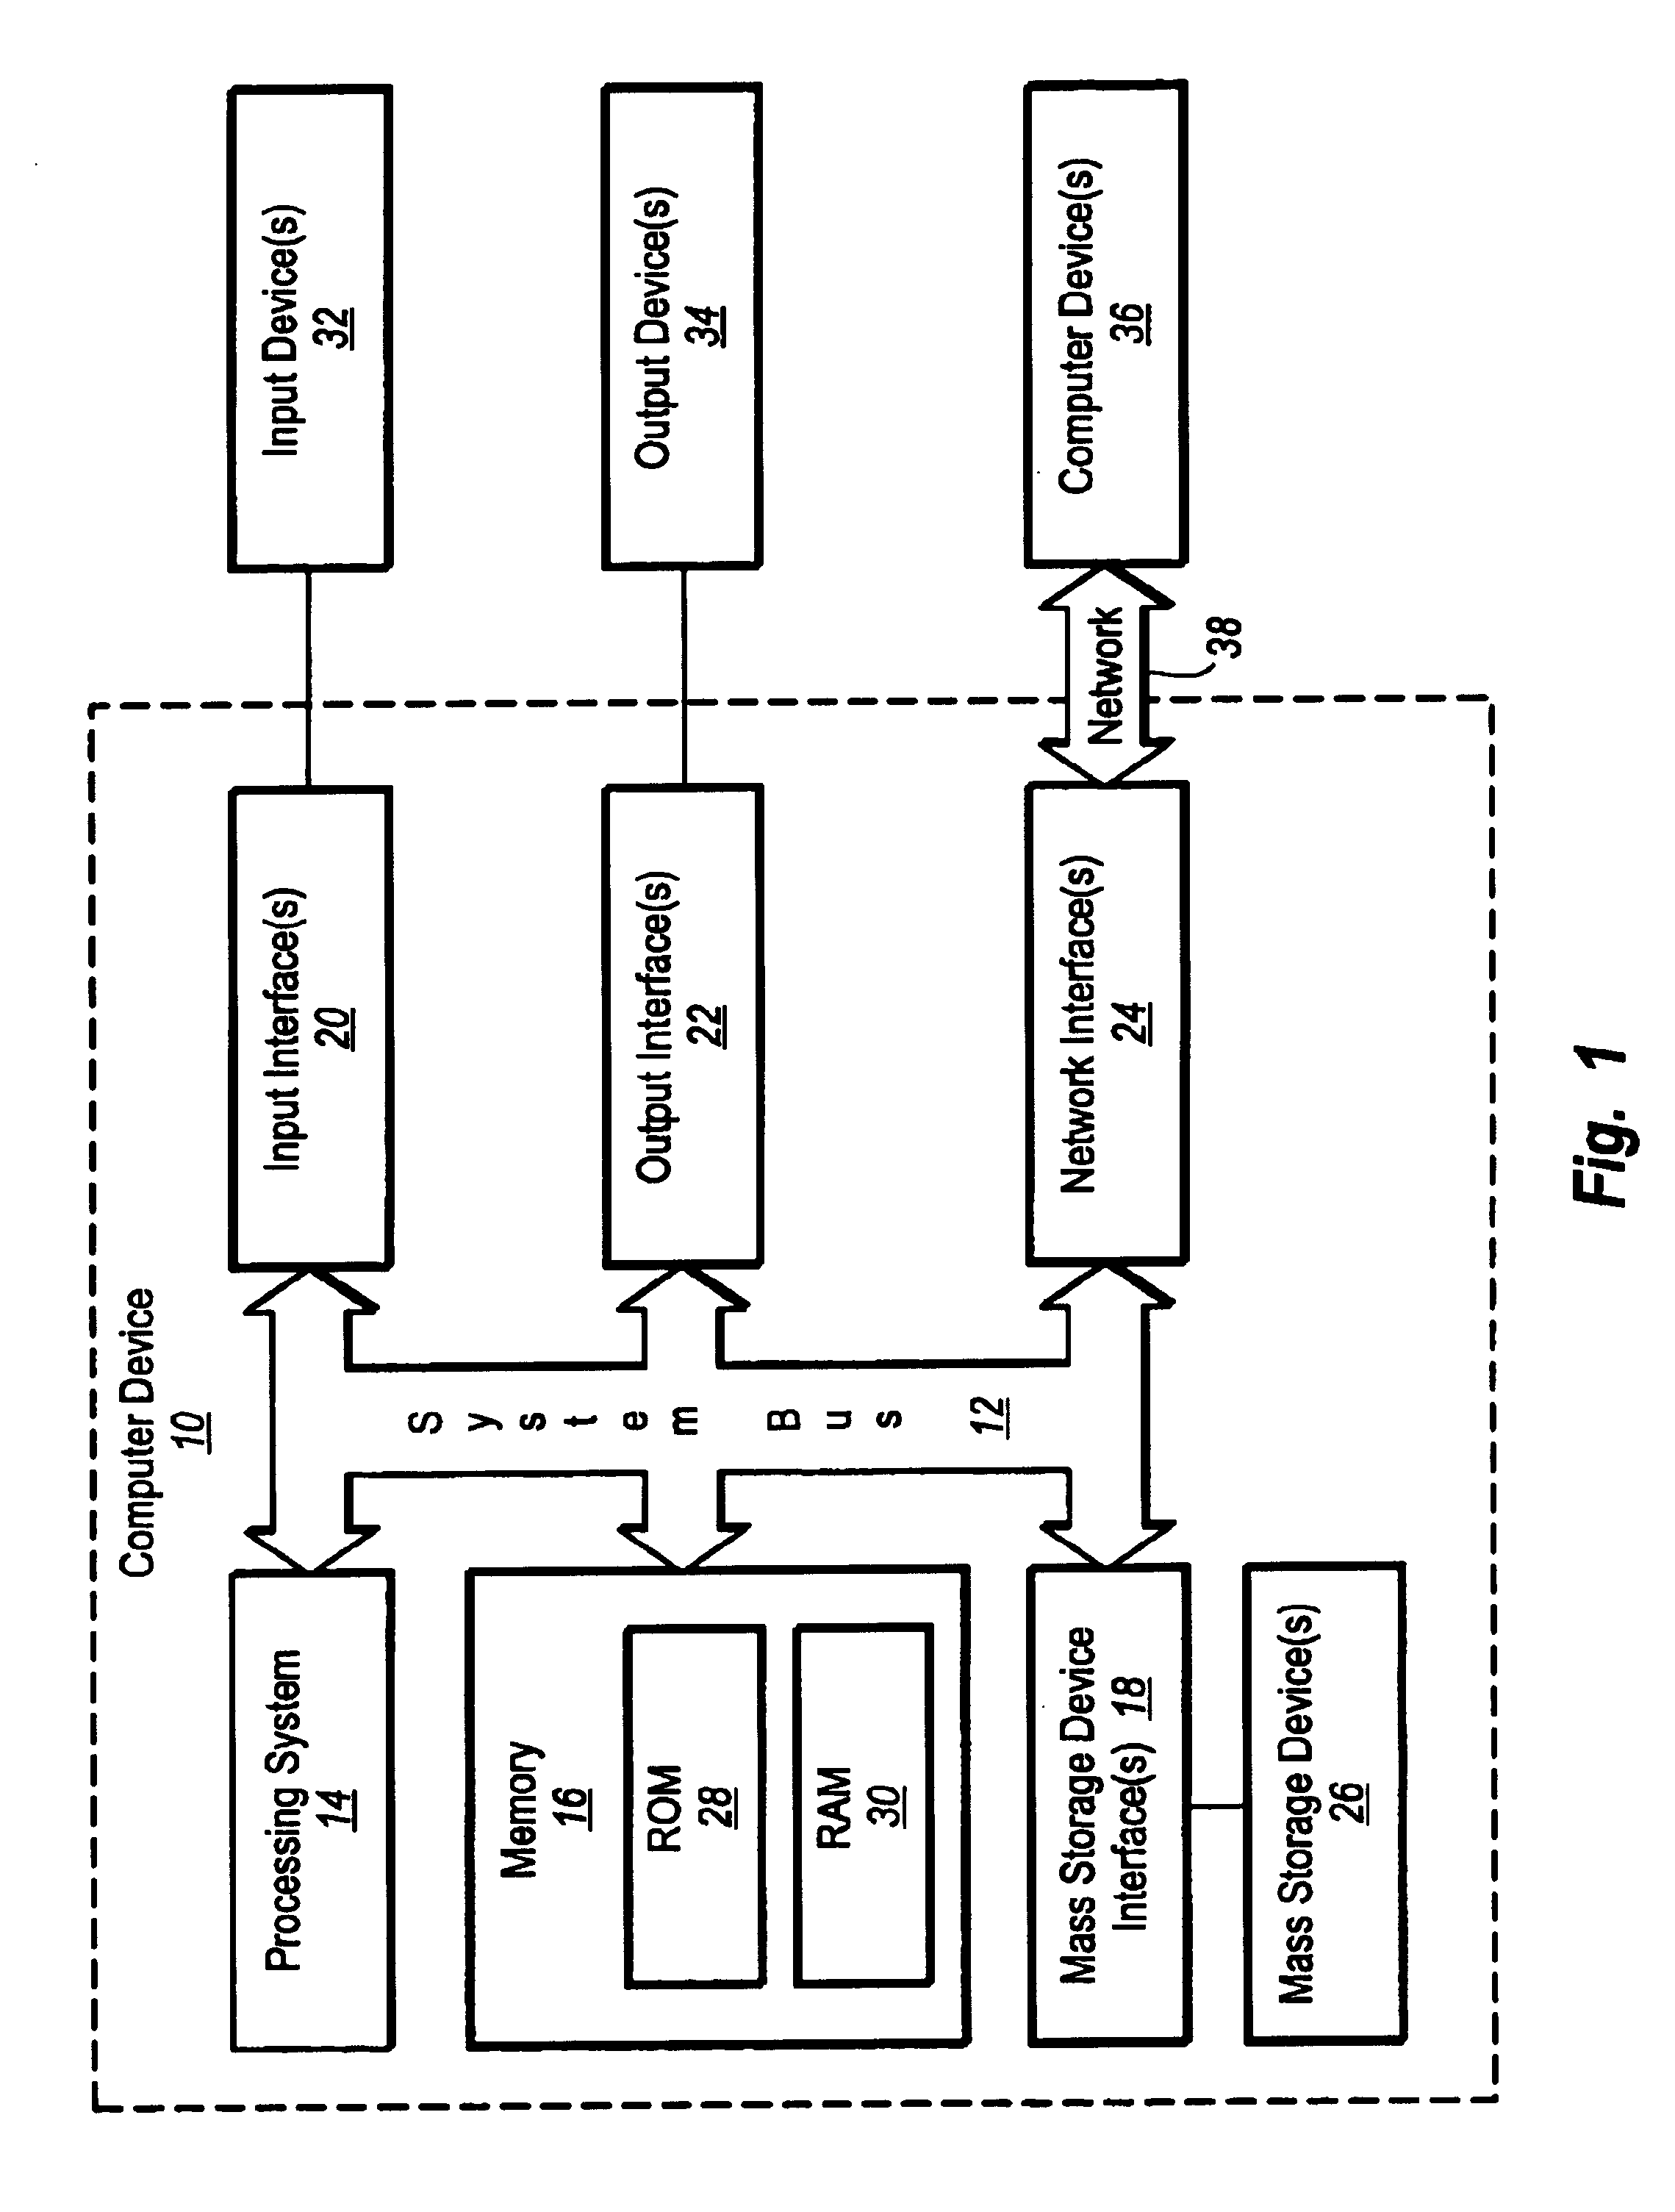 Virtual print driver system and method